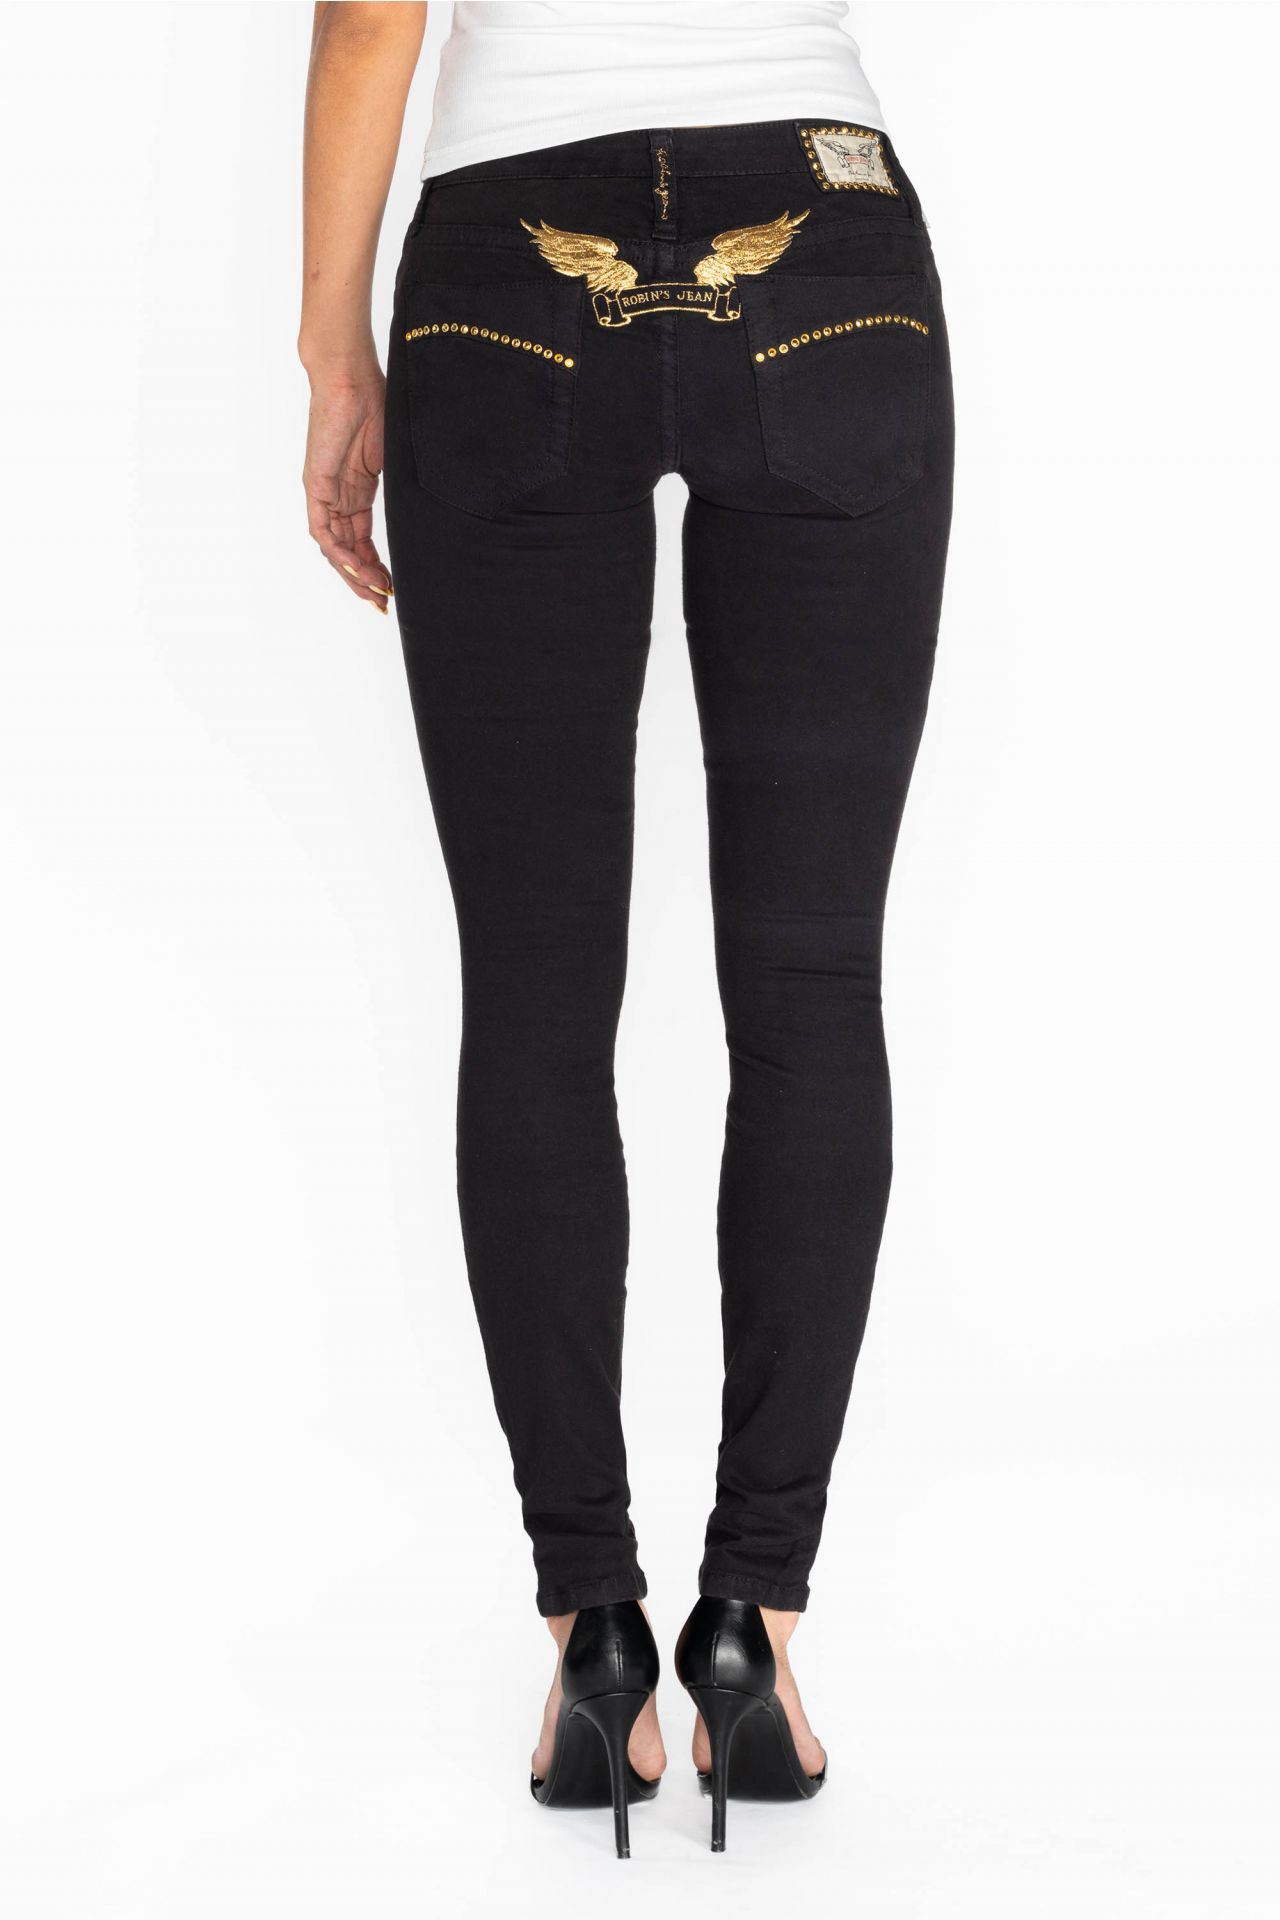 MARILYN LOW RISE WOMENS STUDDED SKINNY JEANS IN BLACK WITH GOLD WINGS AND GOLD CRYSTALS